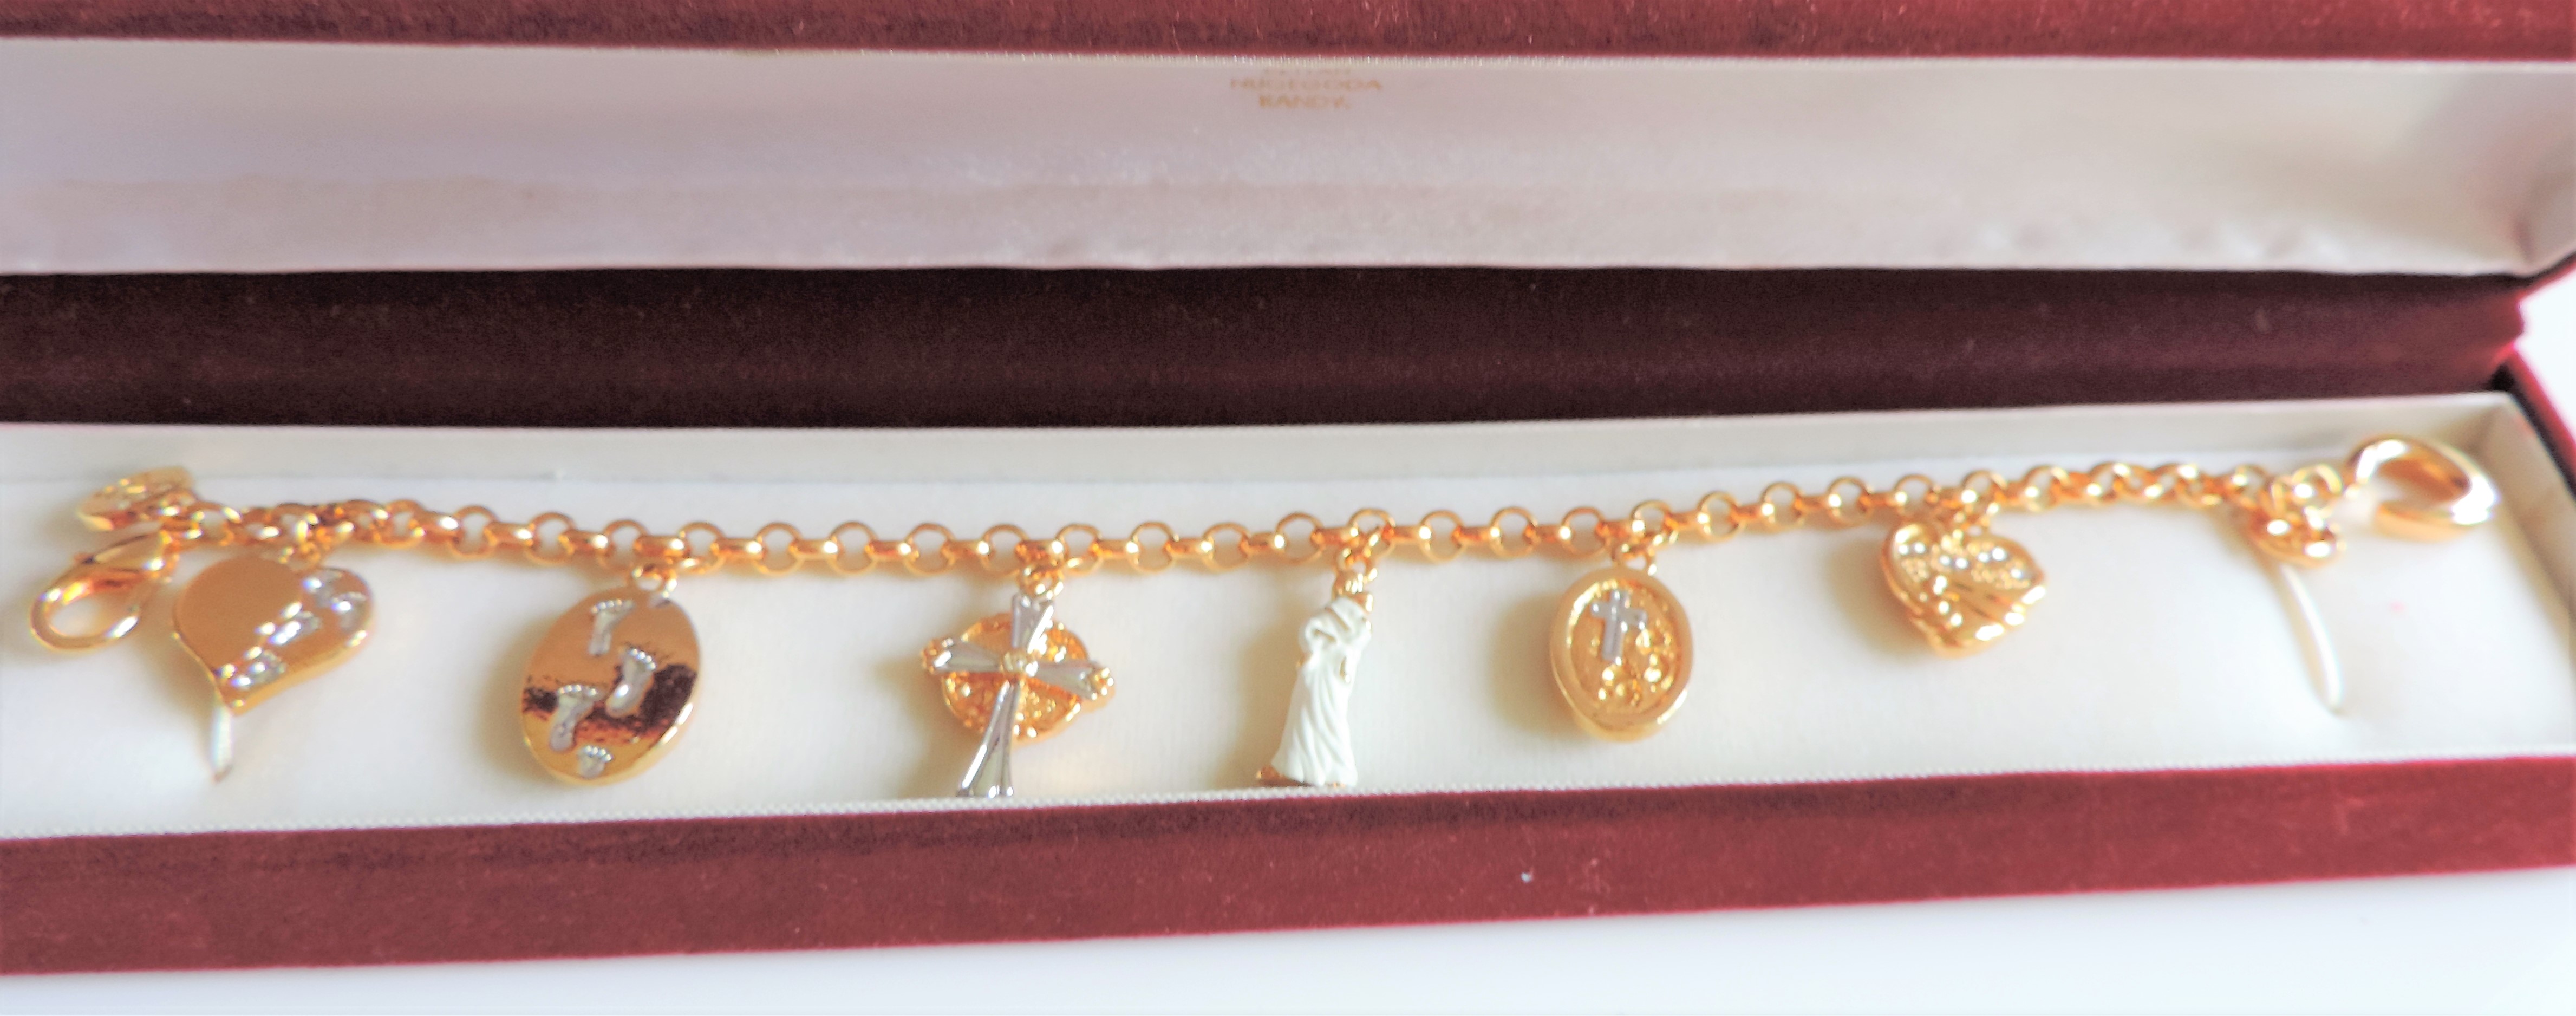 Brooks and Bentley Footprints in the Sand Gold Plate Charm Bracelet